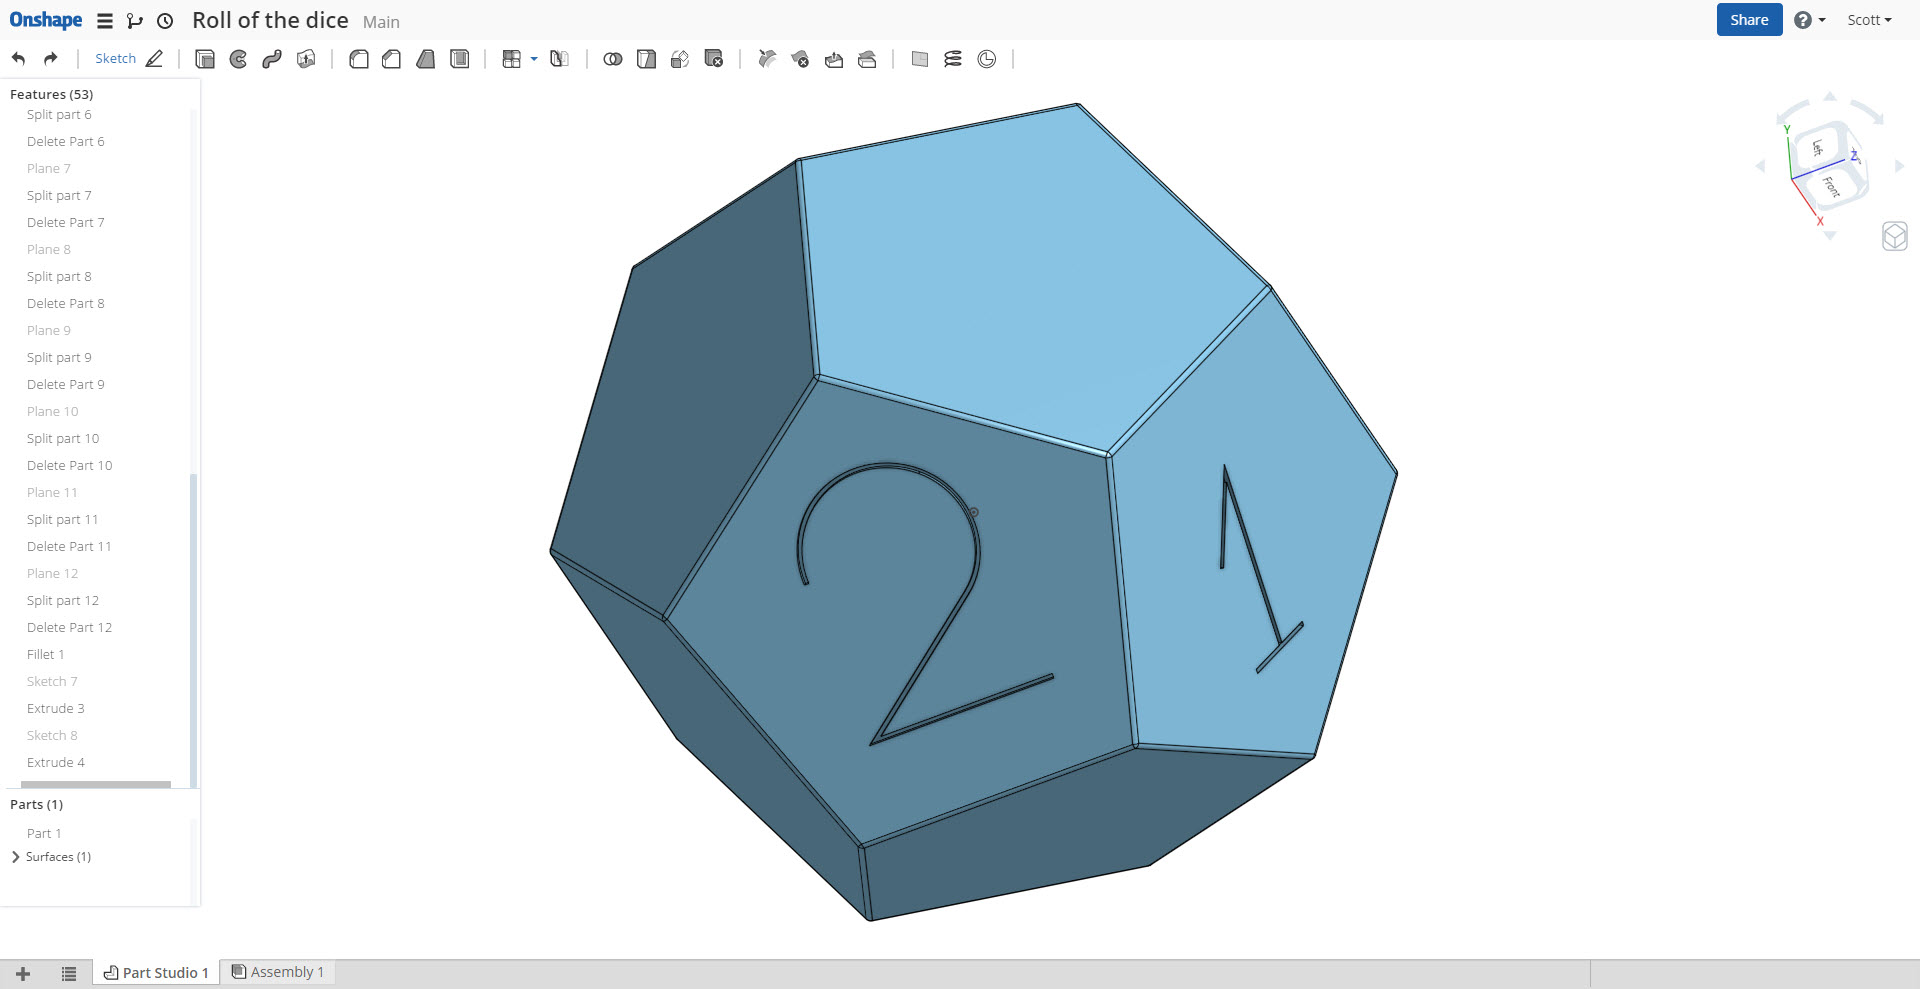 Onshape’s Roll of the Dice – Initial Review